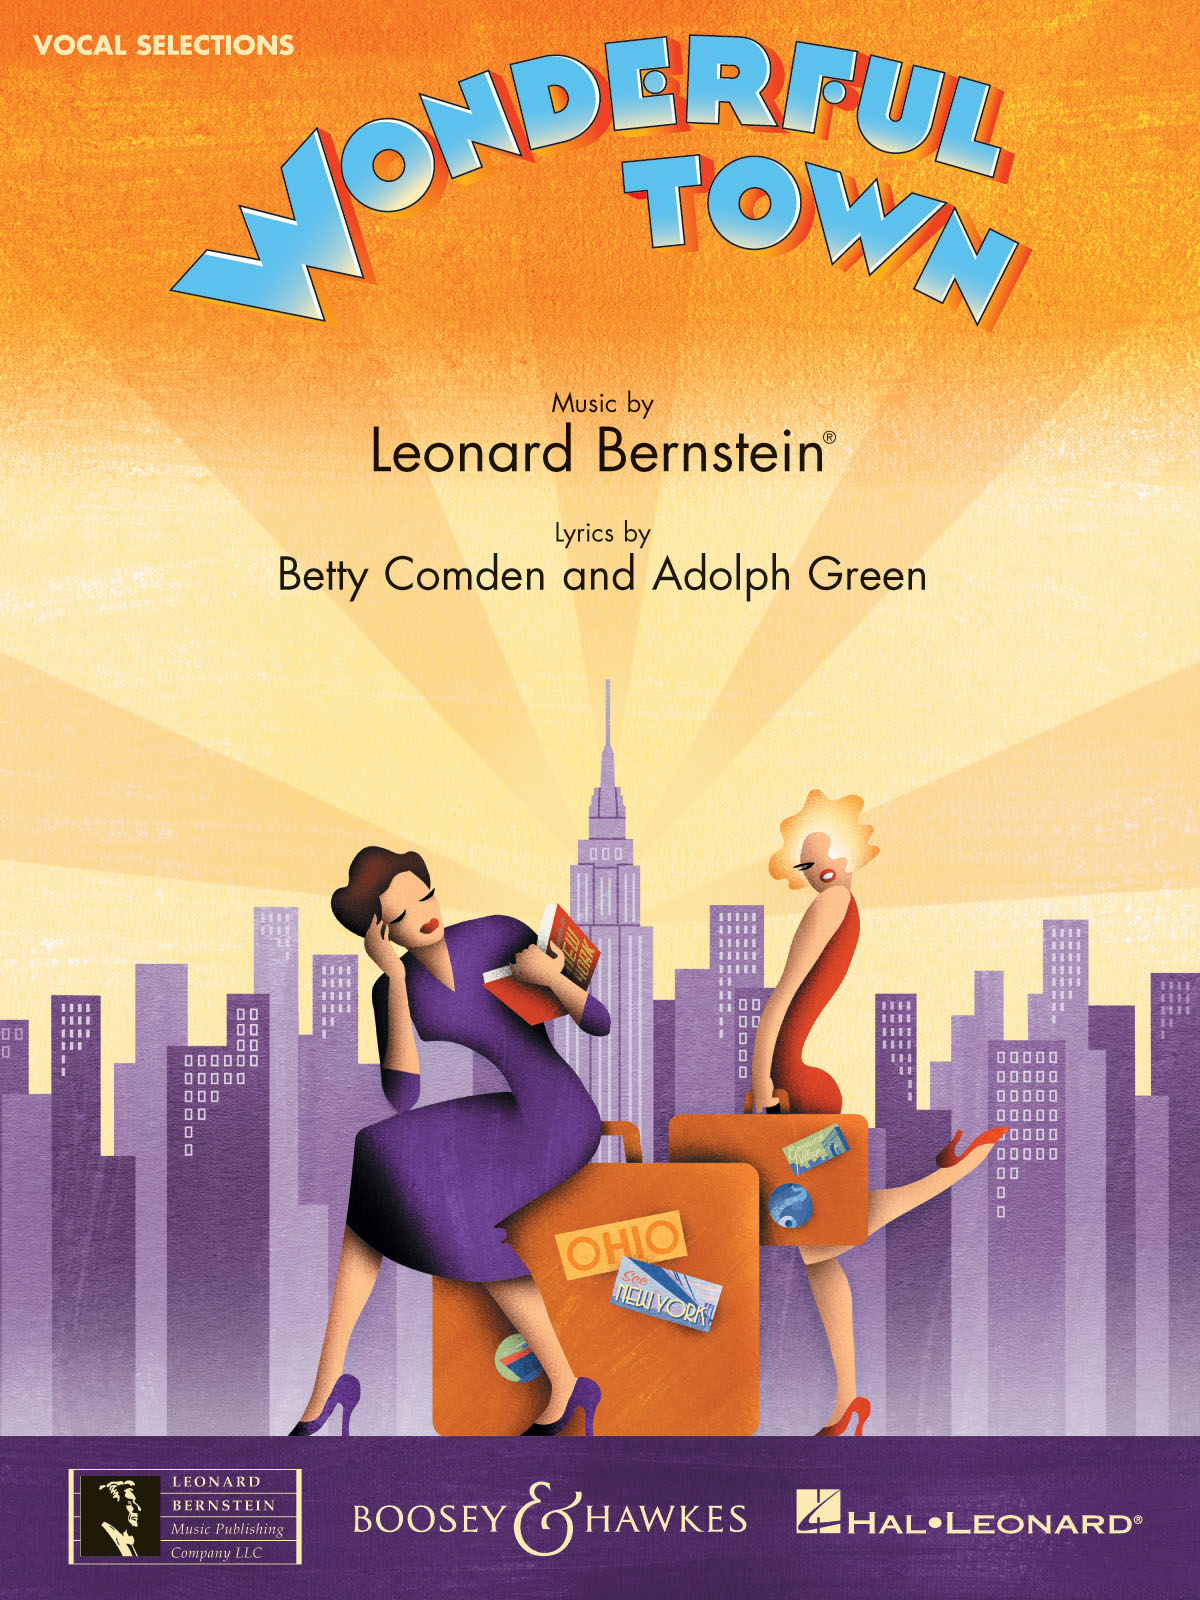 Leonard Bernstein: Wonderful Town - Vocal Selection: Piano  Vocal and Guitar: